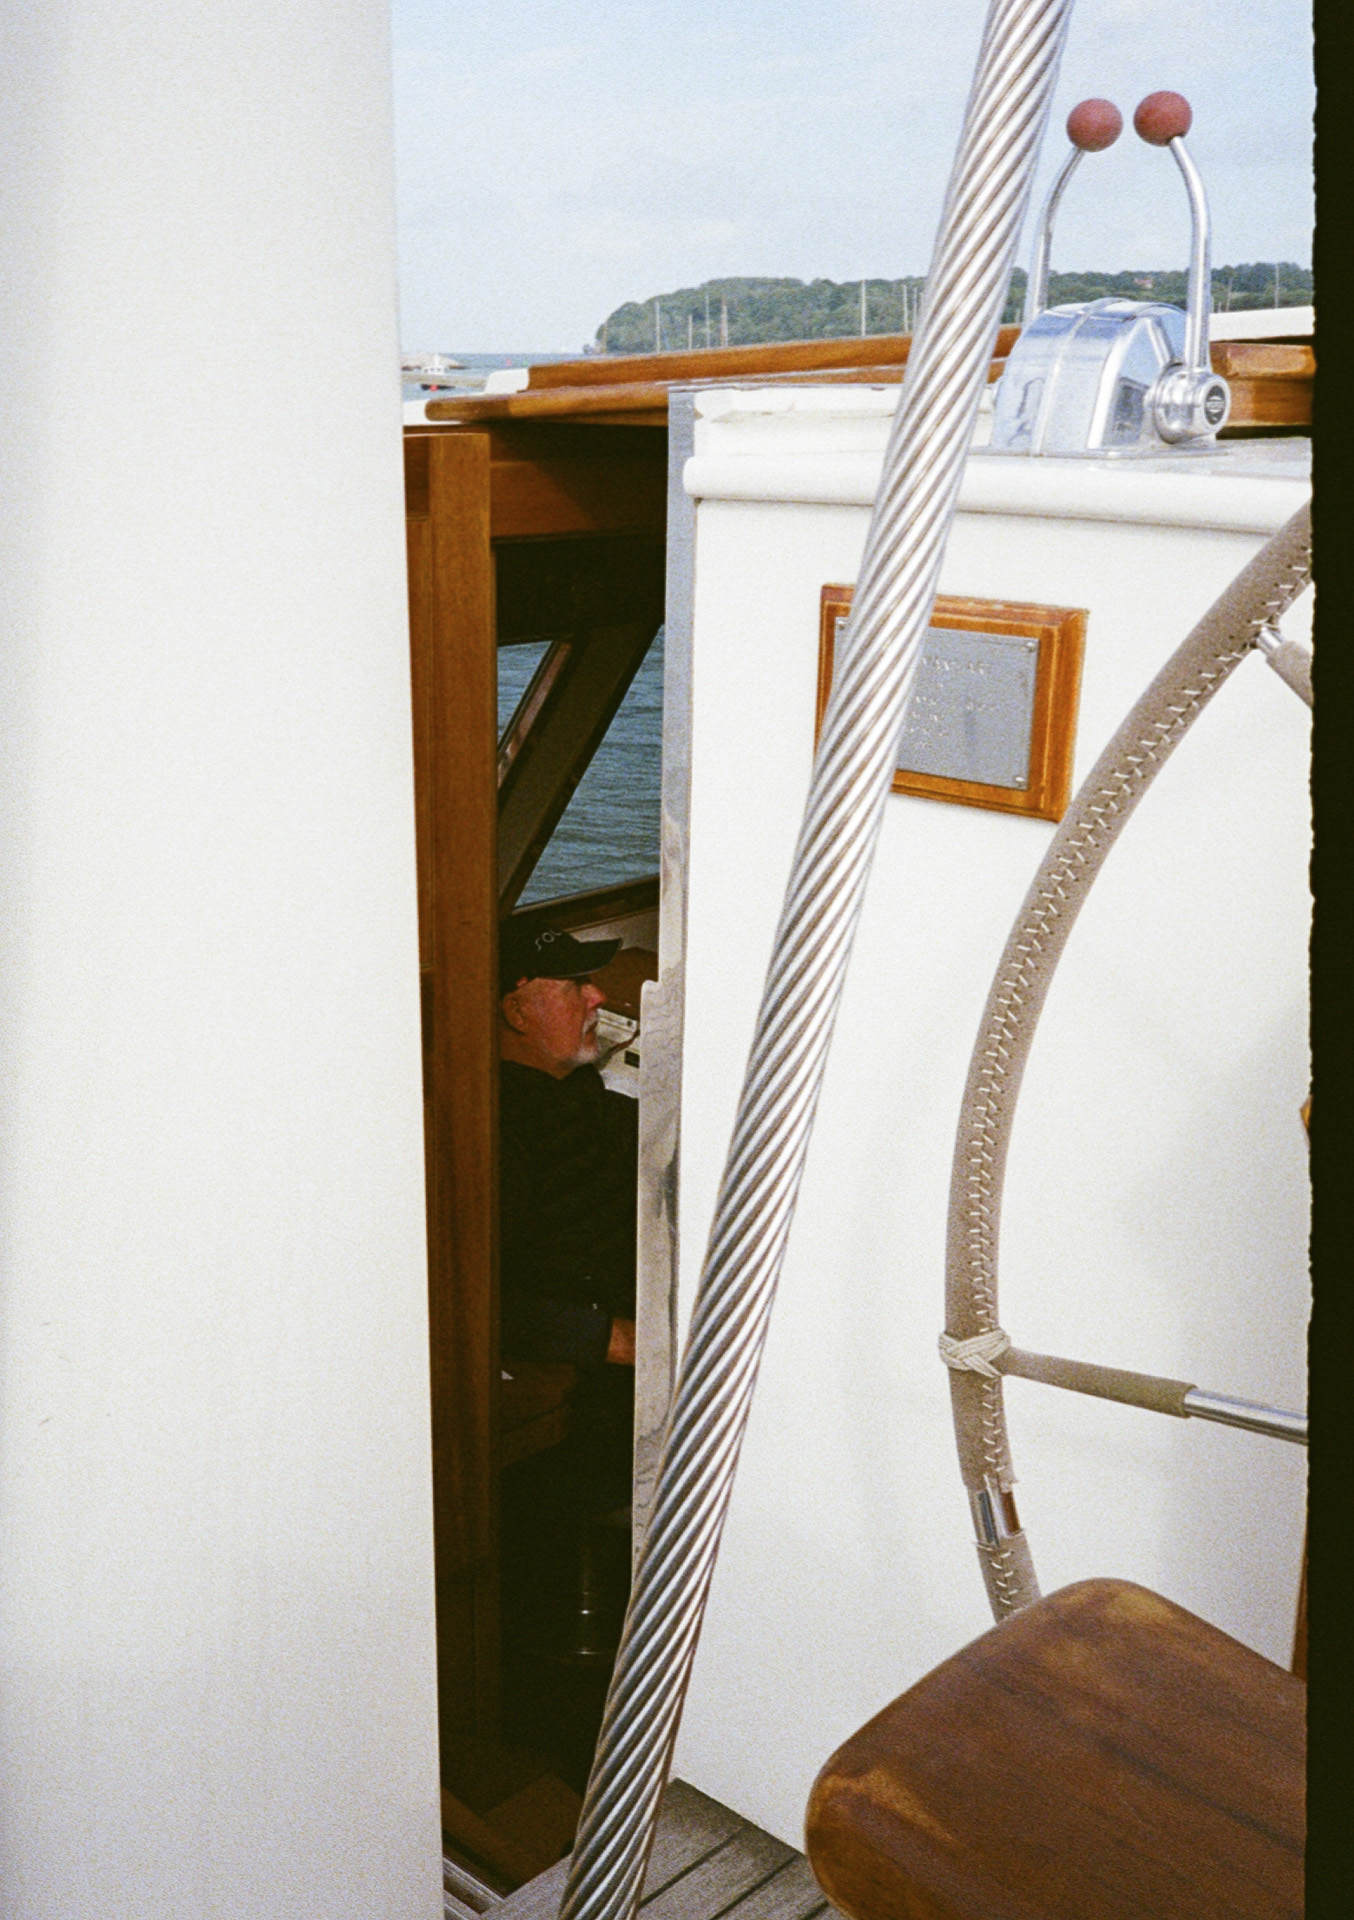 Pentax 17 films scans of sailing and yacht details